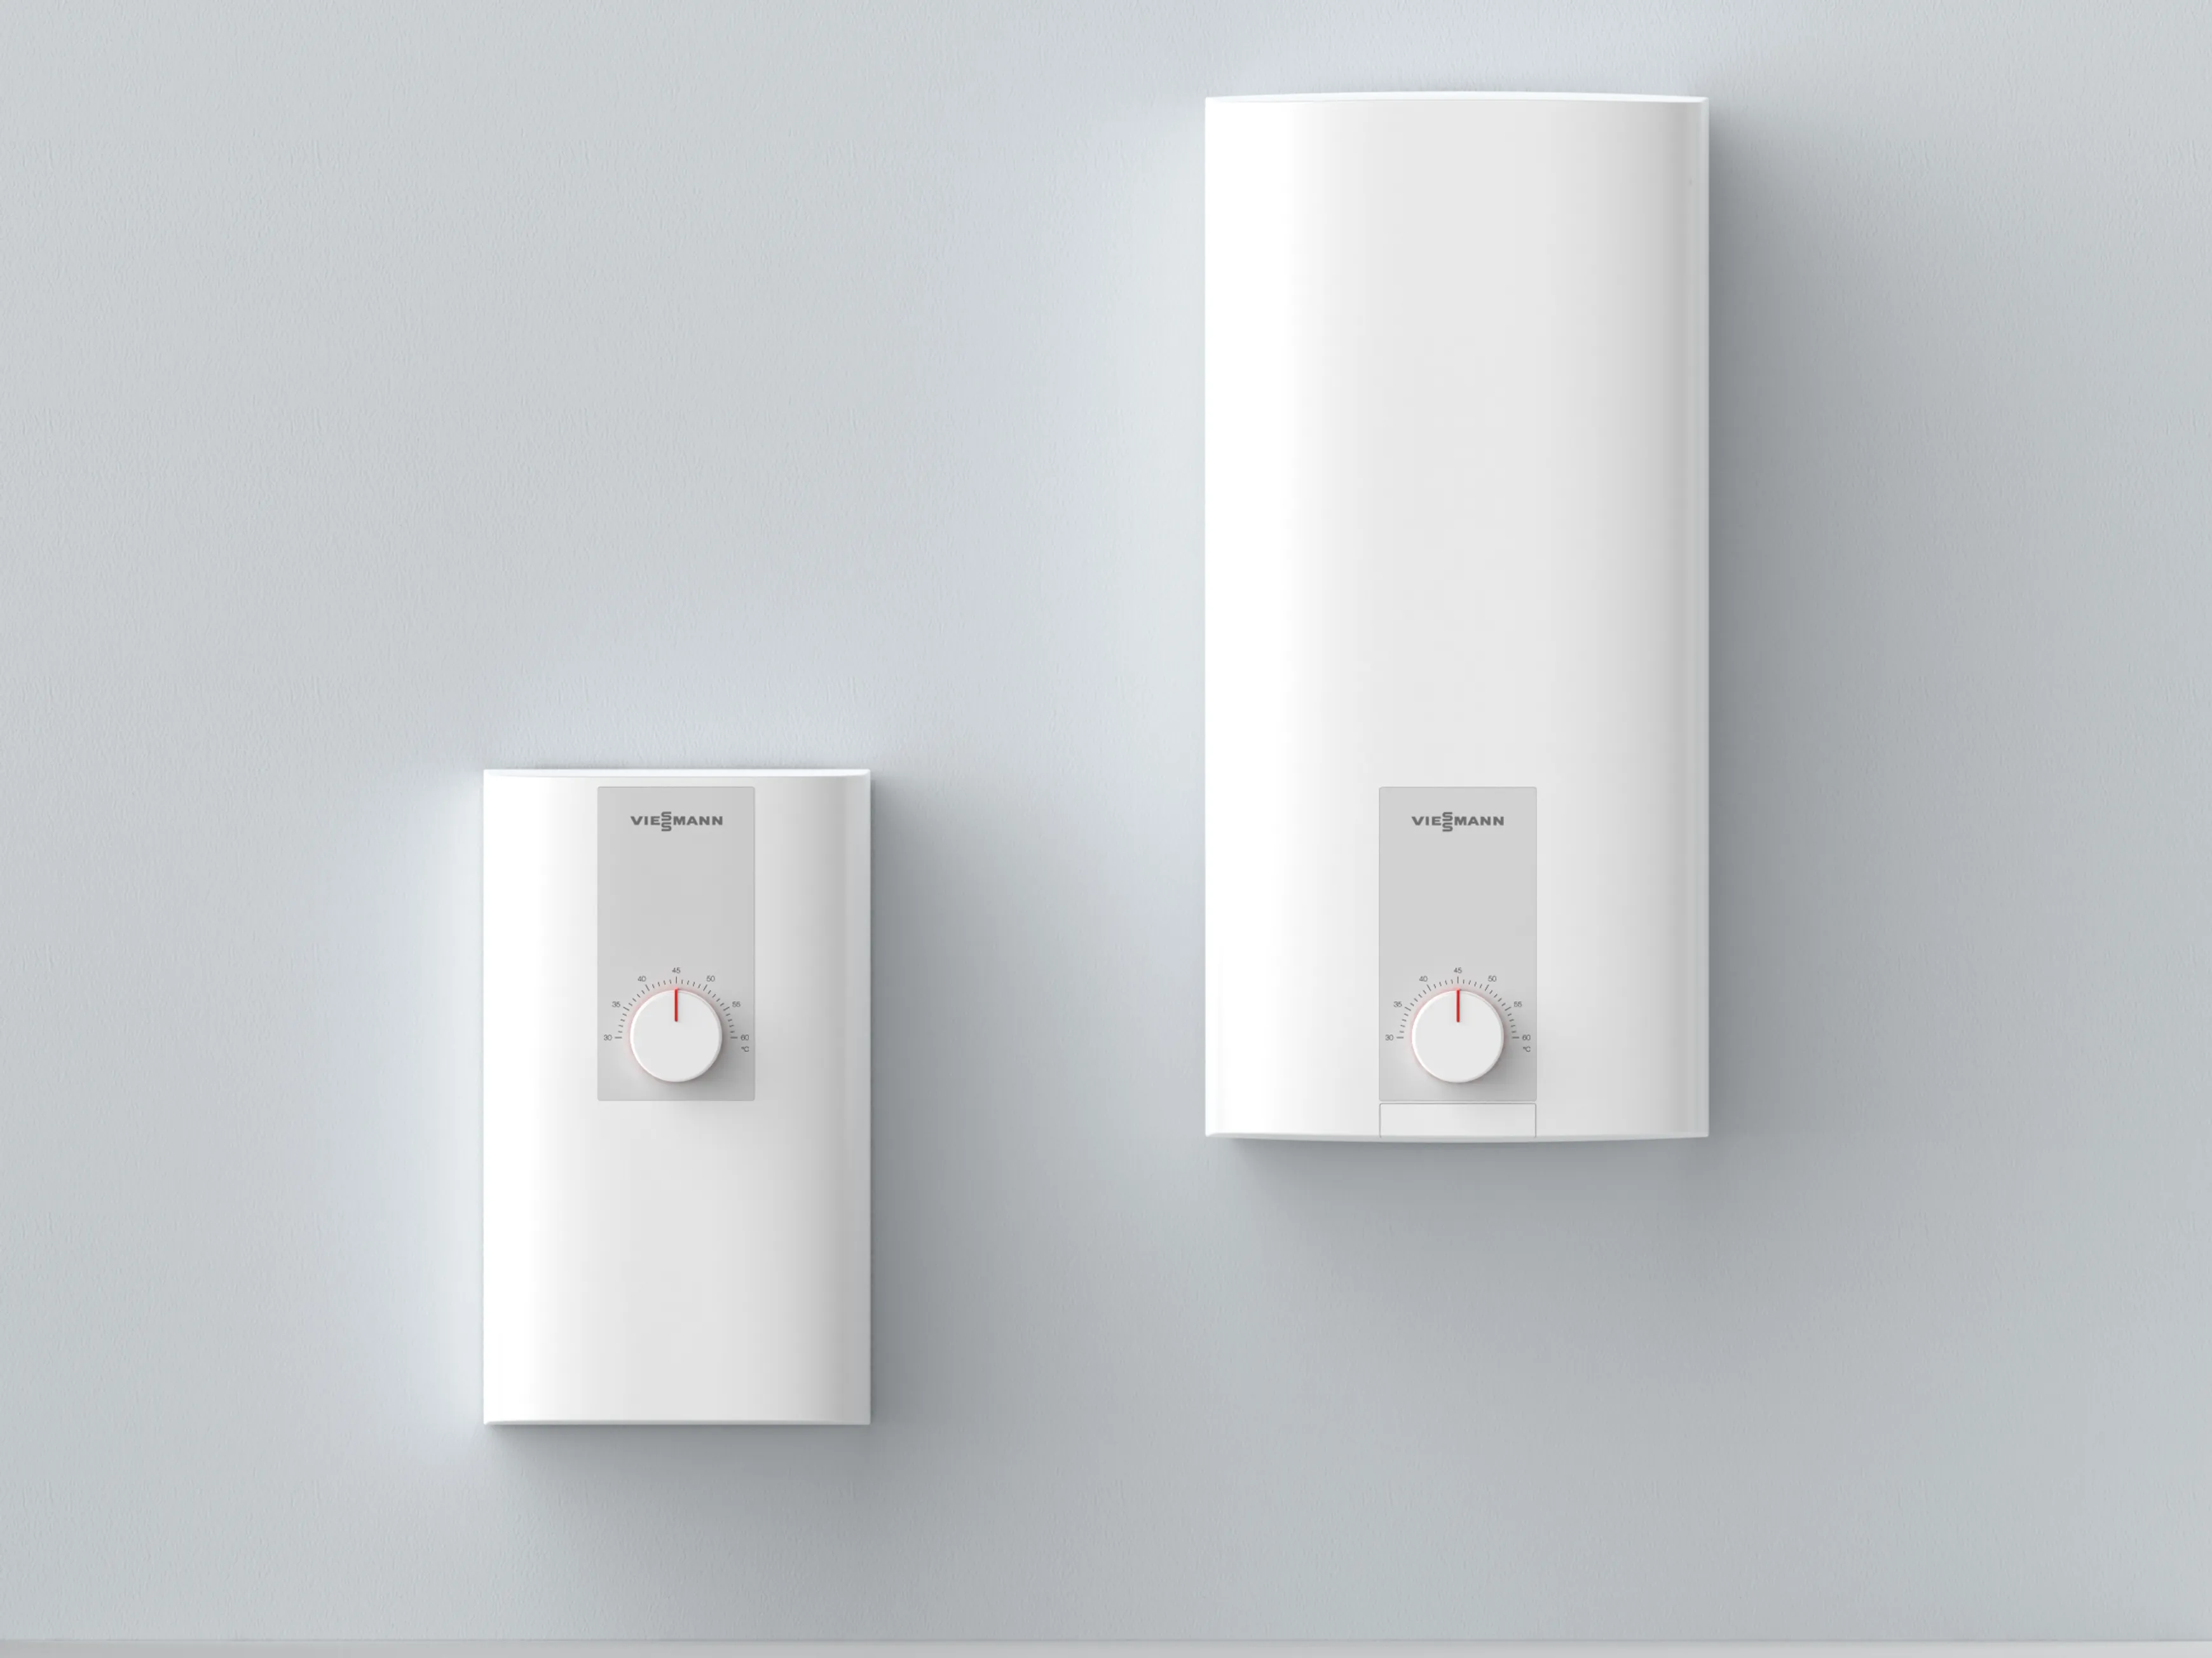 Two different Viessmann Vitotherm models mounted on a wall